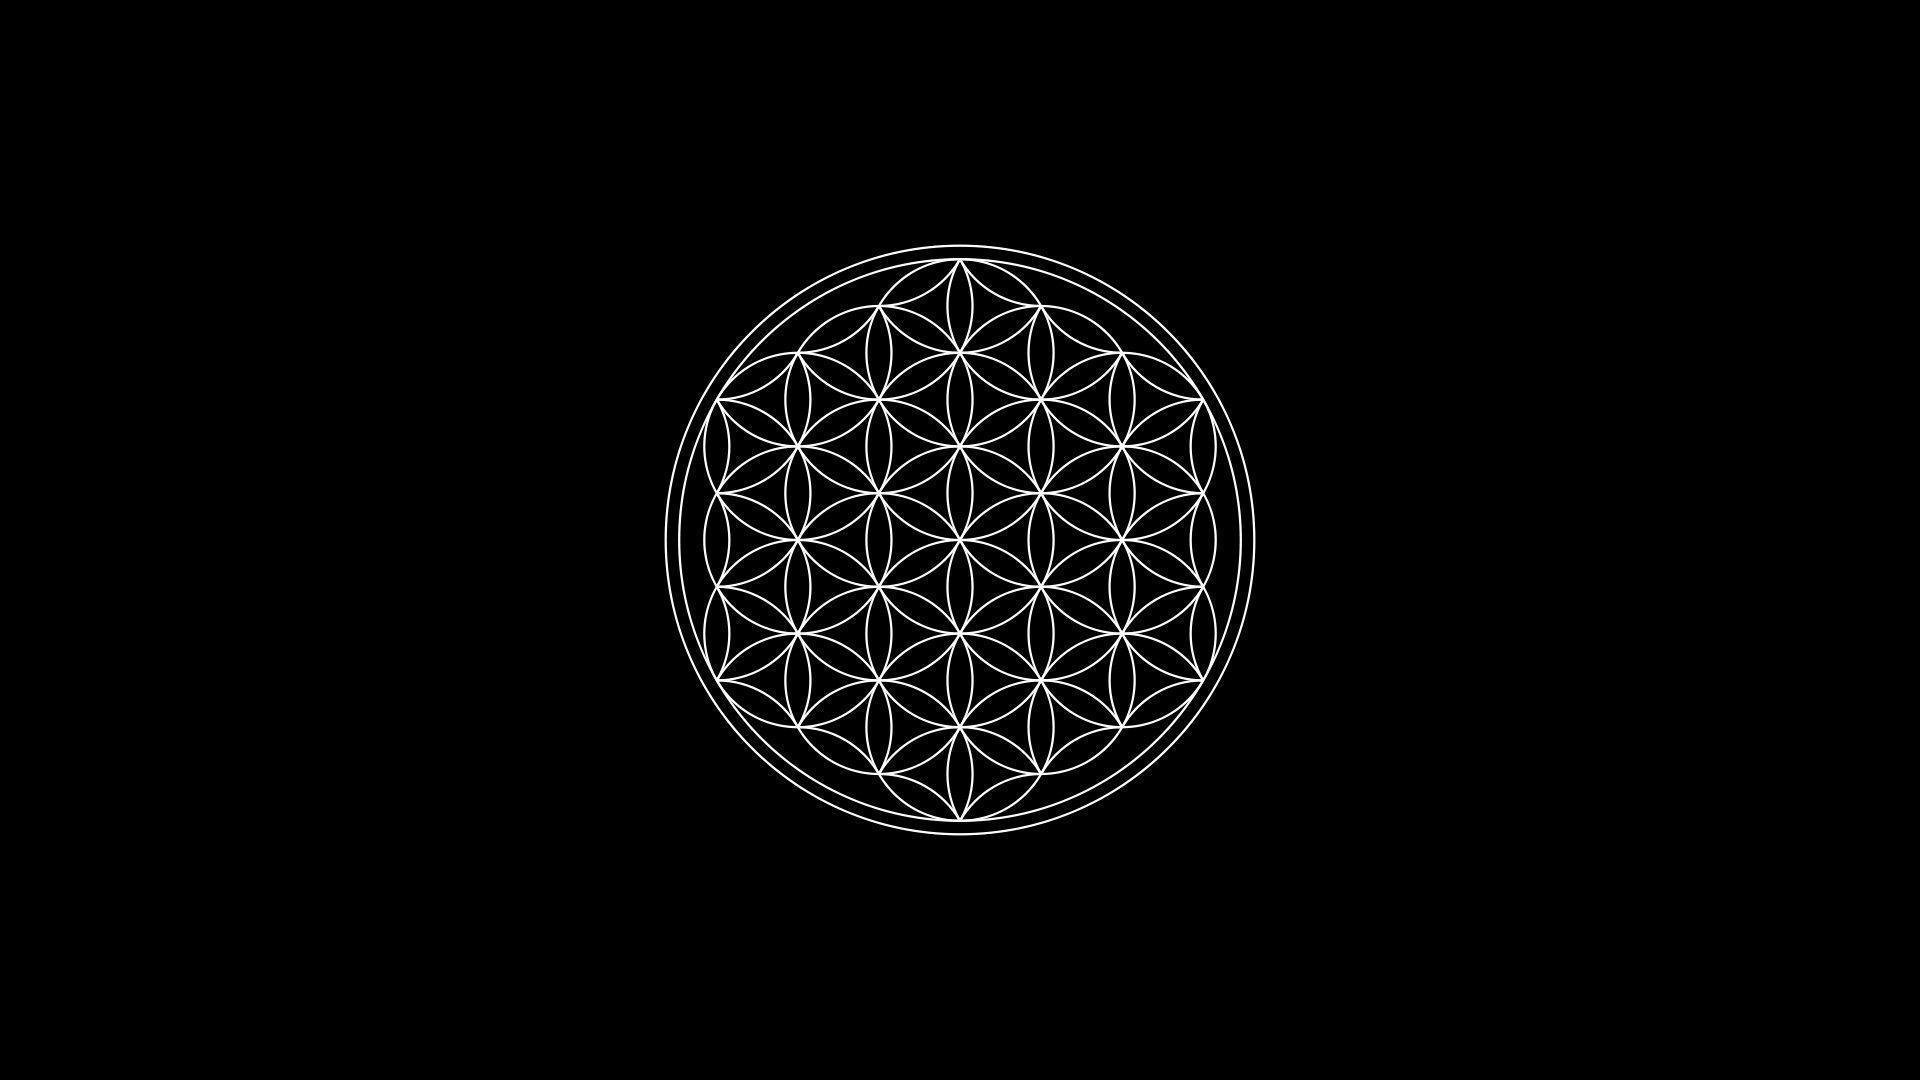 Flower Of Life Wallpapers - Wallpaper Cave